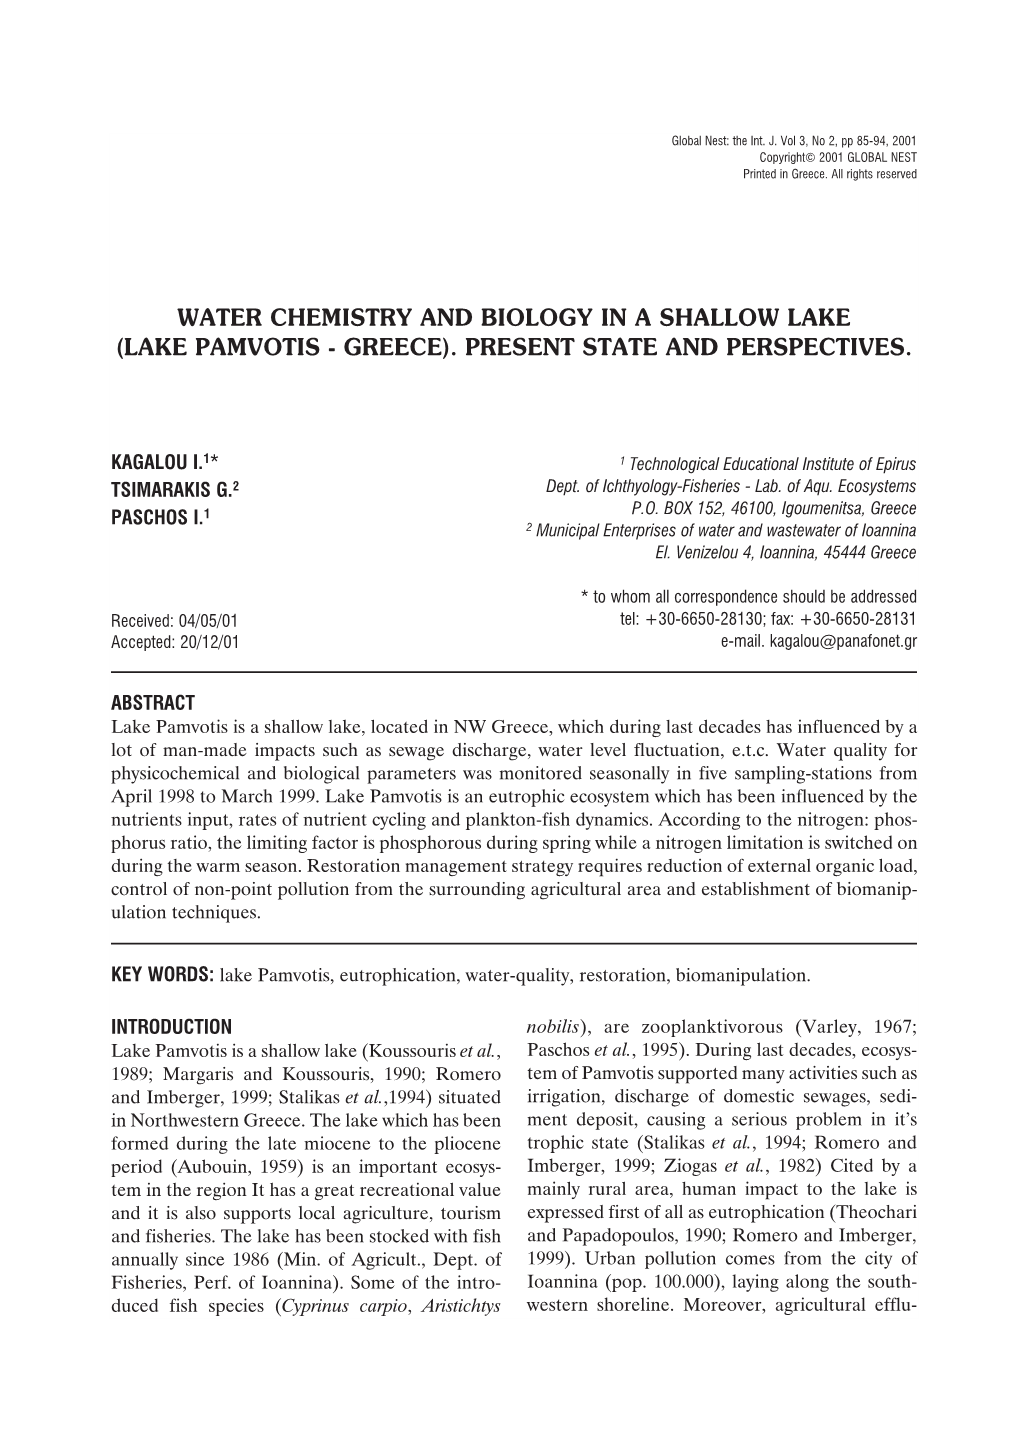 Water Chemistry and Biology in a Shallow Lake (Lake Pamvotis - Greece)